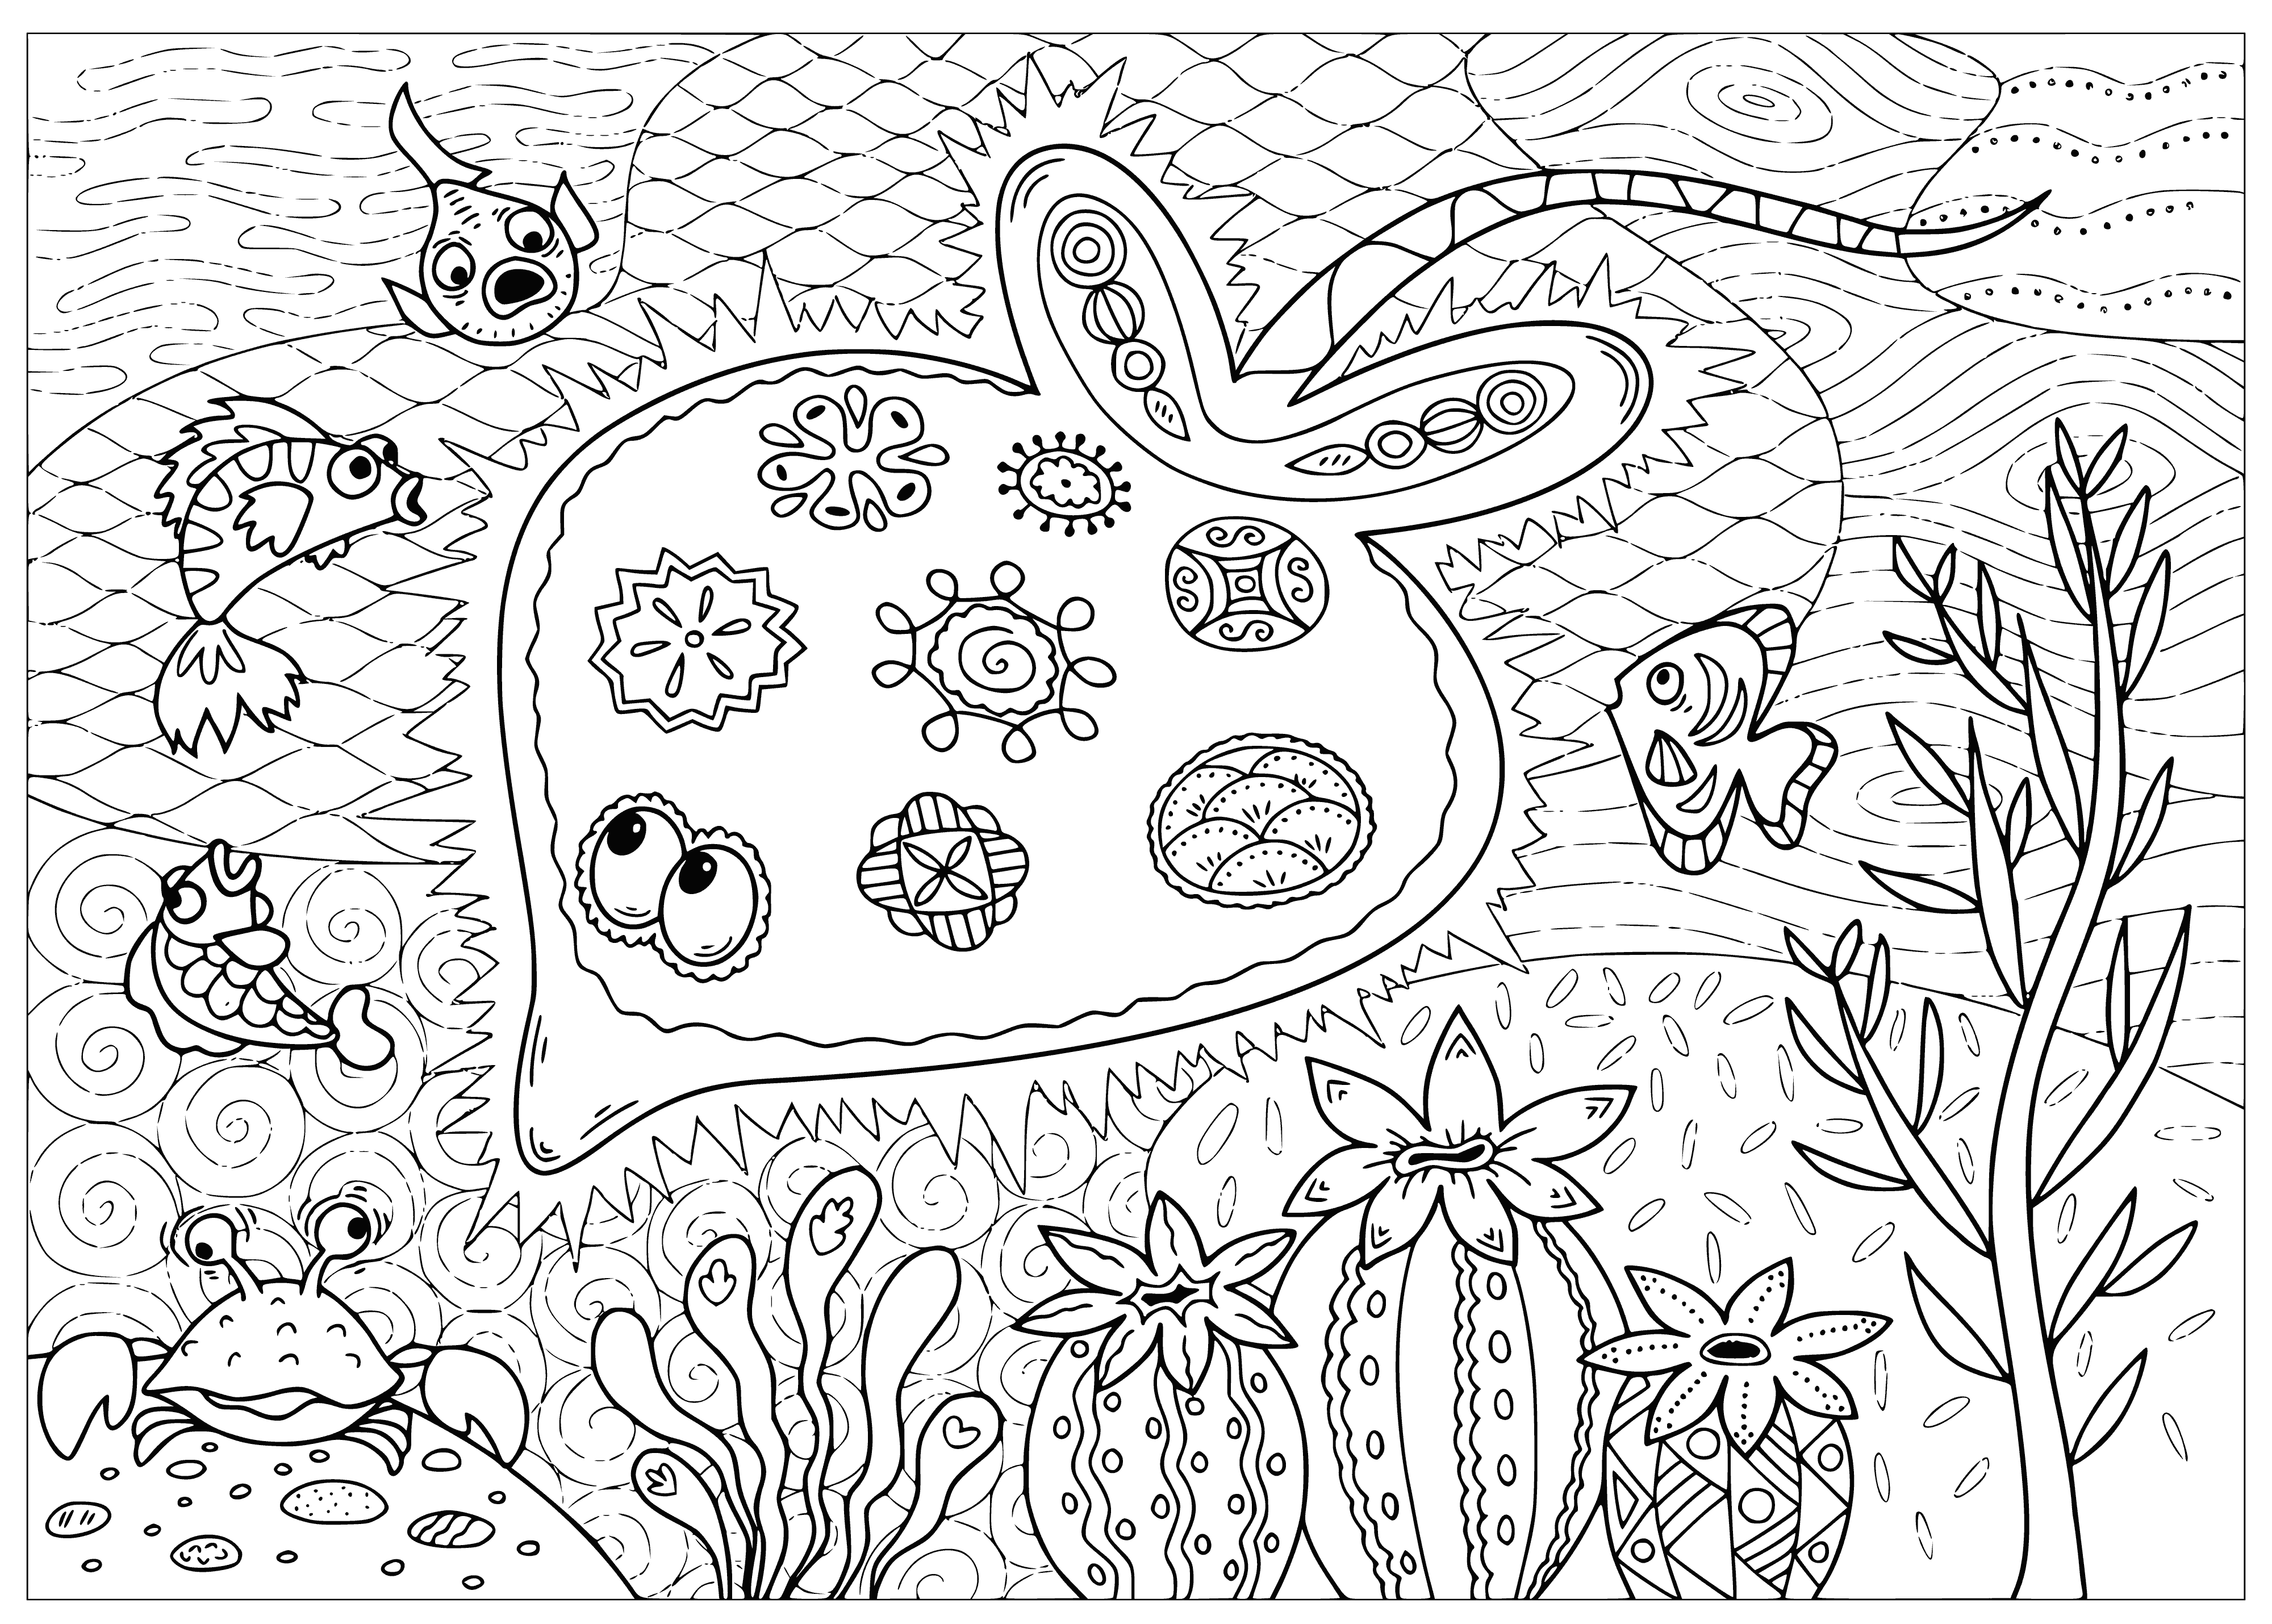 Electric Stingray coloring page